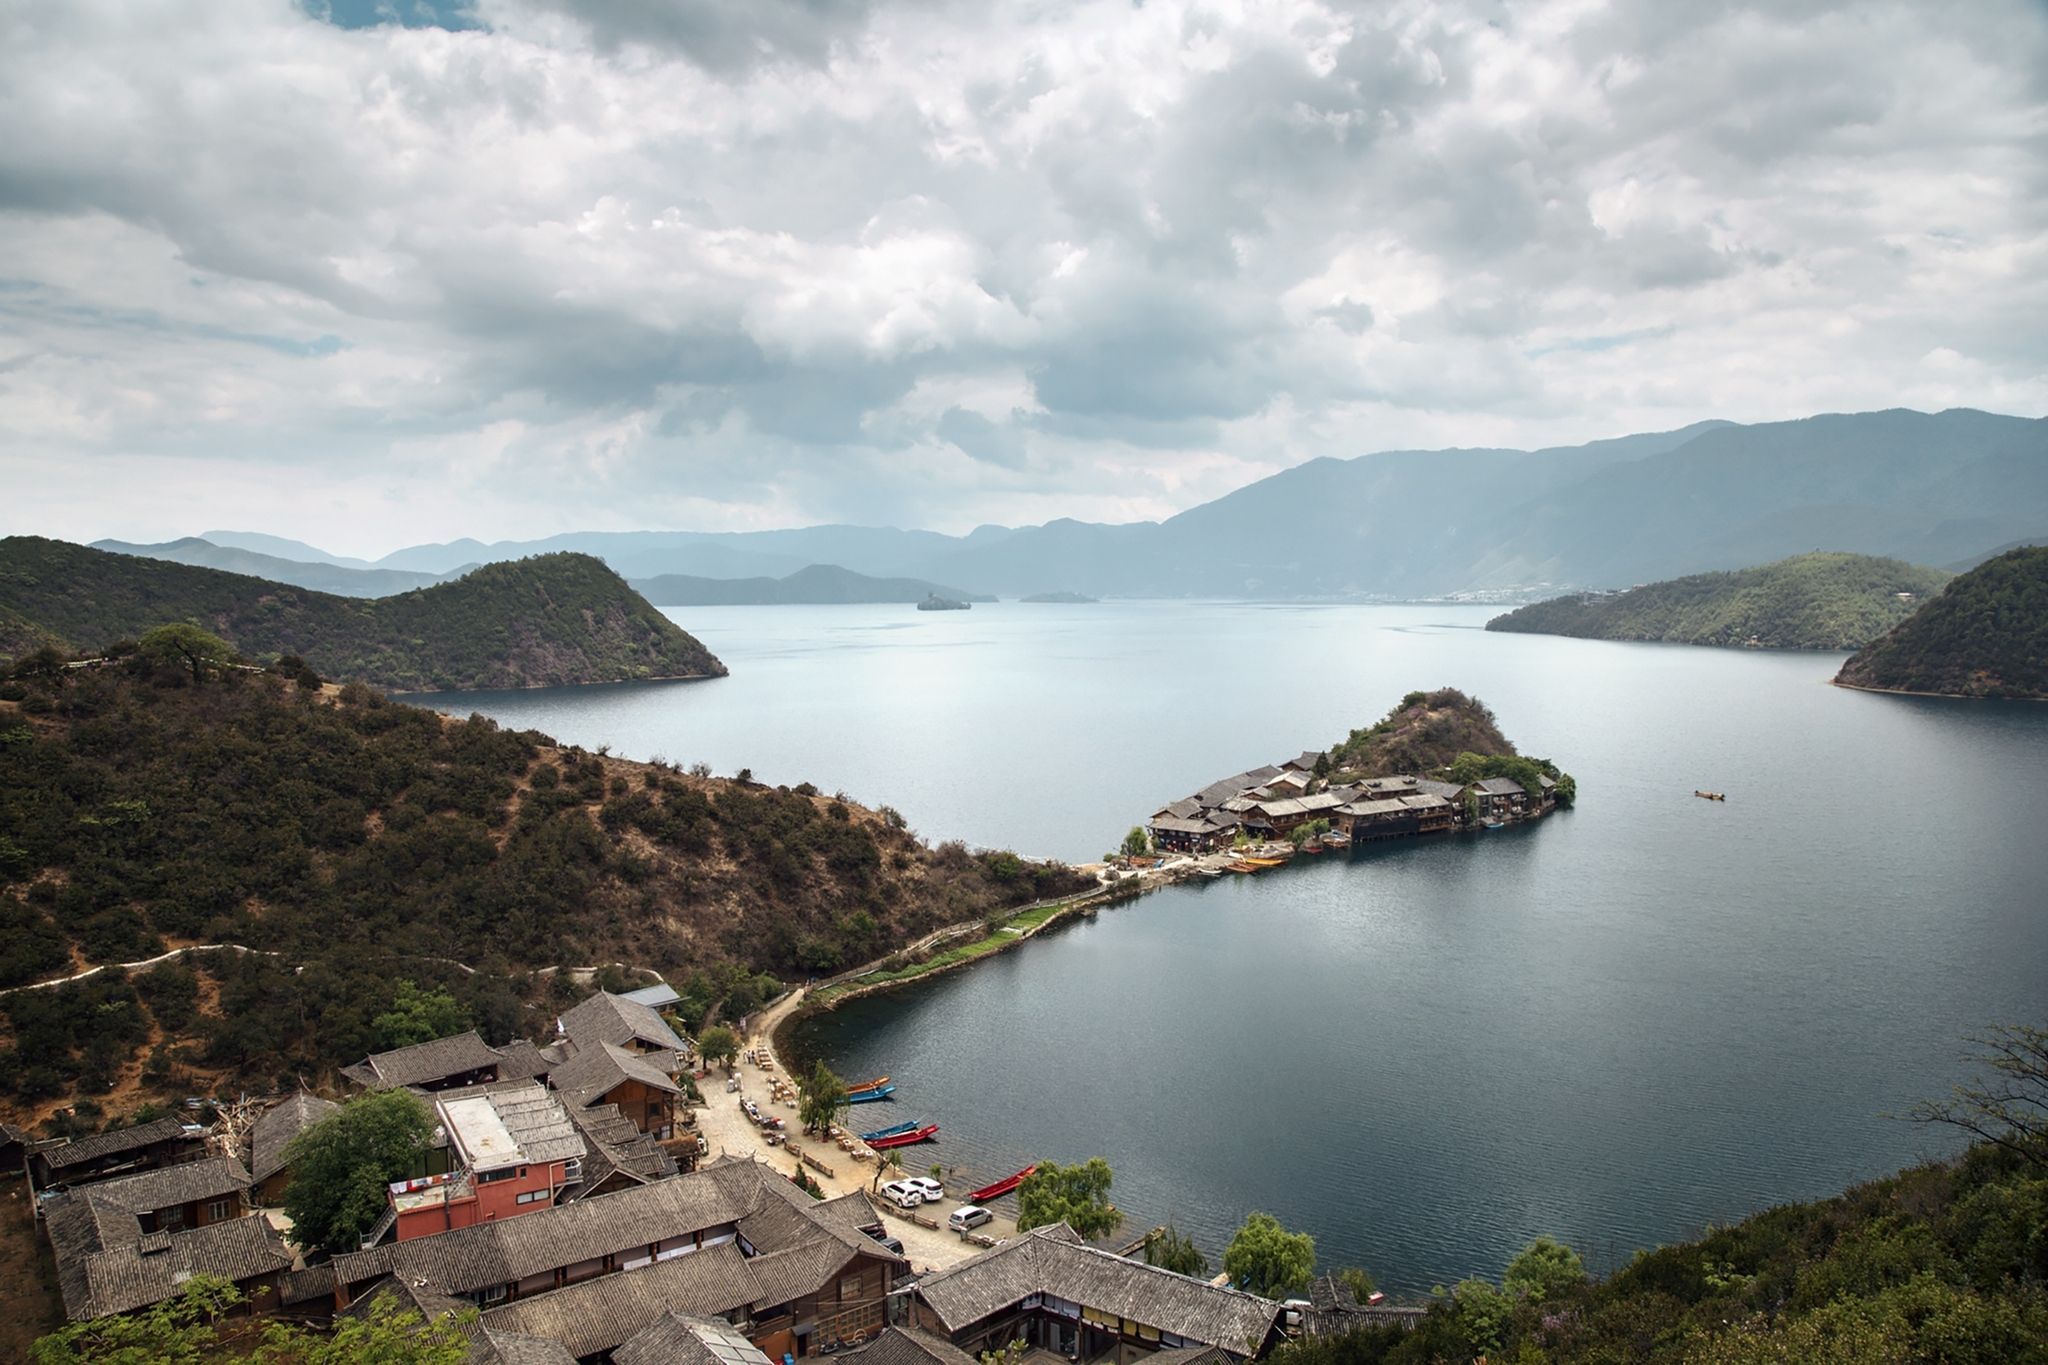 Lugu Lake, the jewel at the center of Mosuo country, straddles China’s Sichuan and Yunnan provinces. Image by Jason Motlagh. China, 2017.
